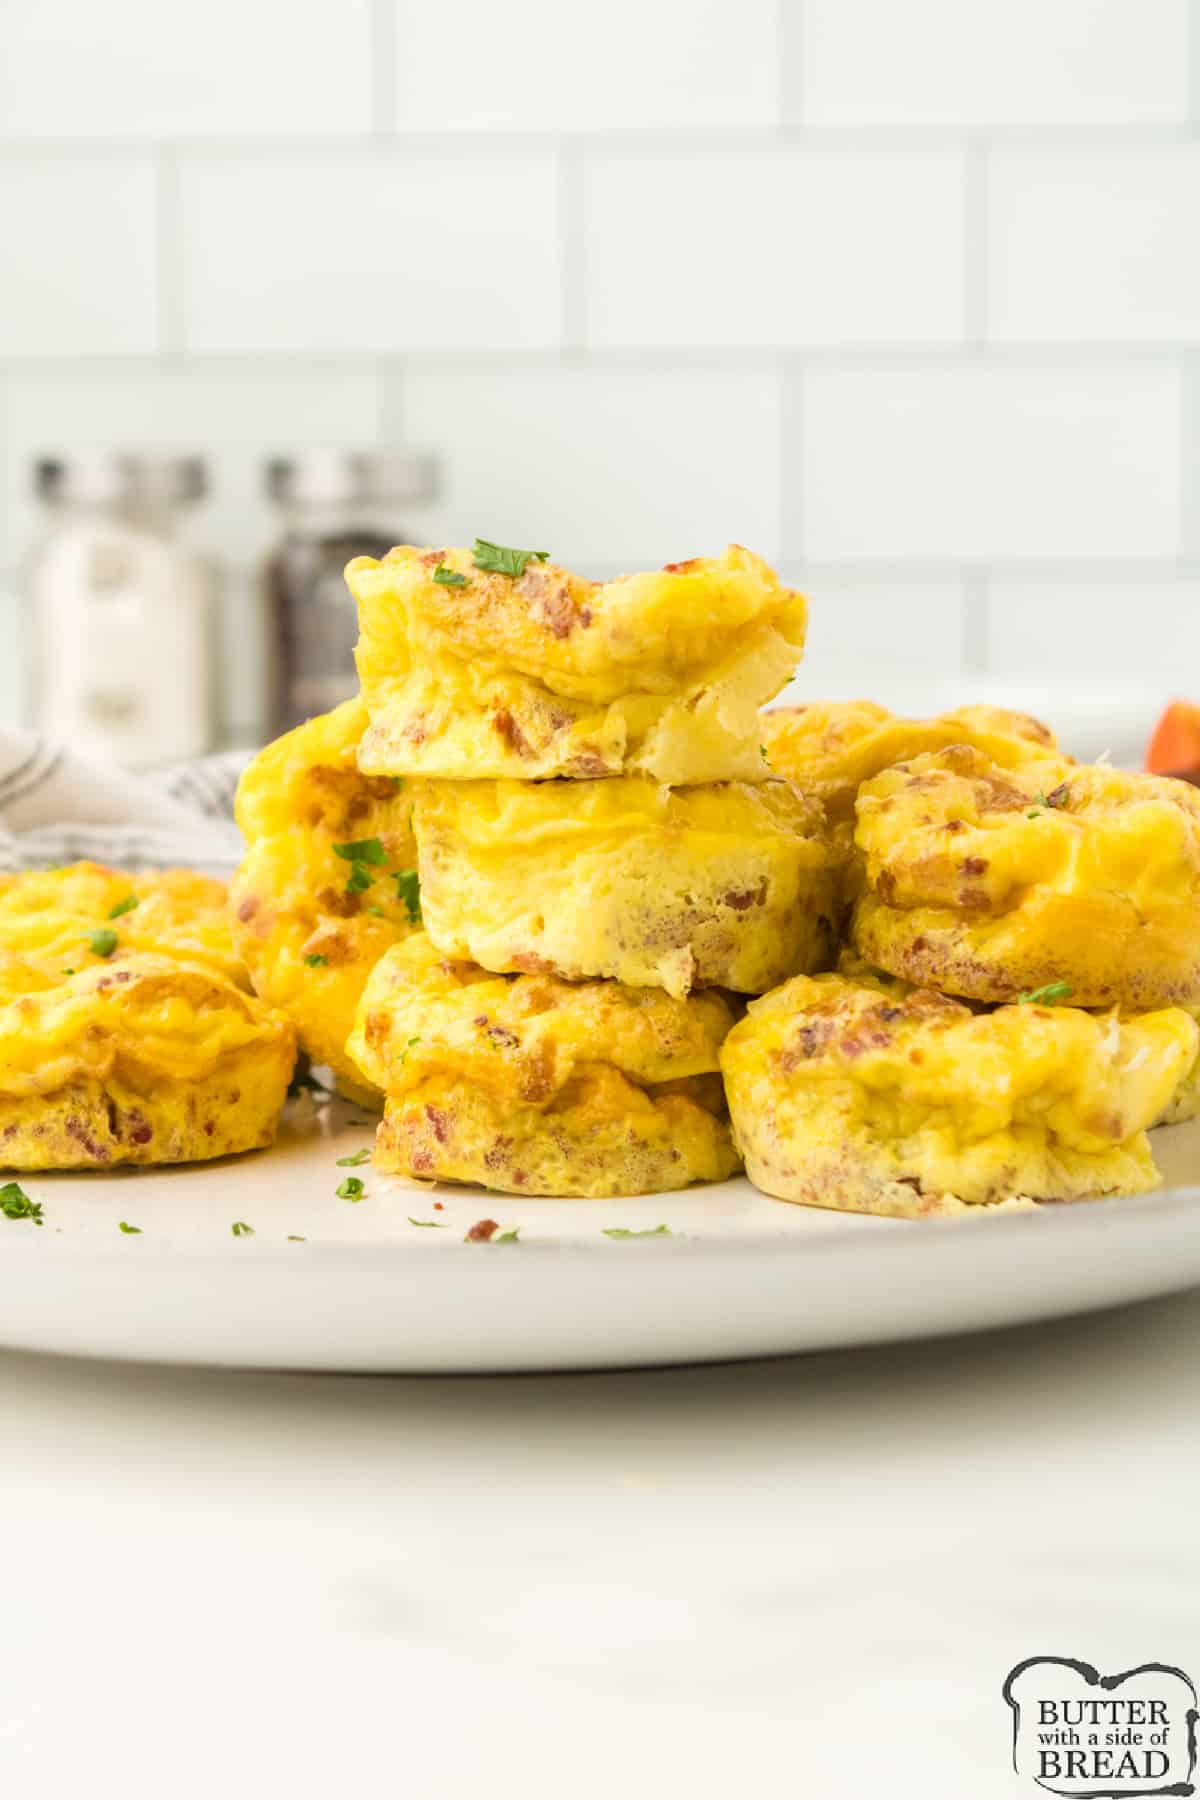 Egg bites made with eggs, milk and cheese